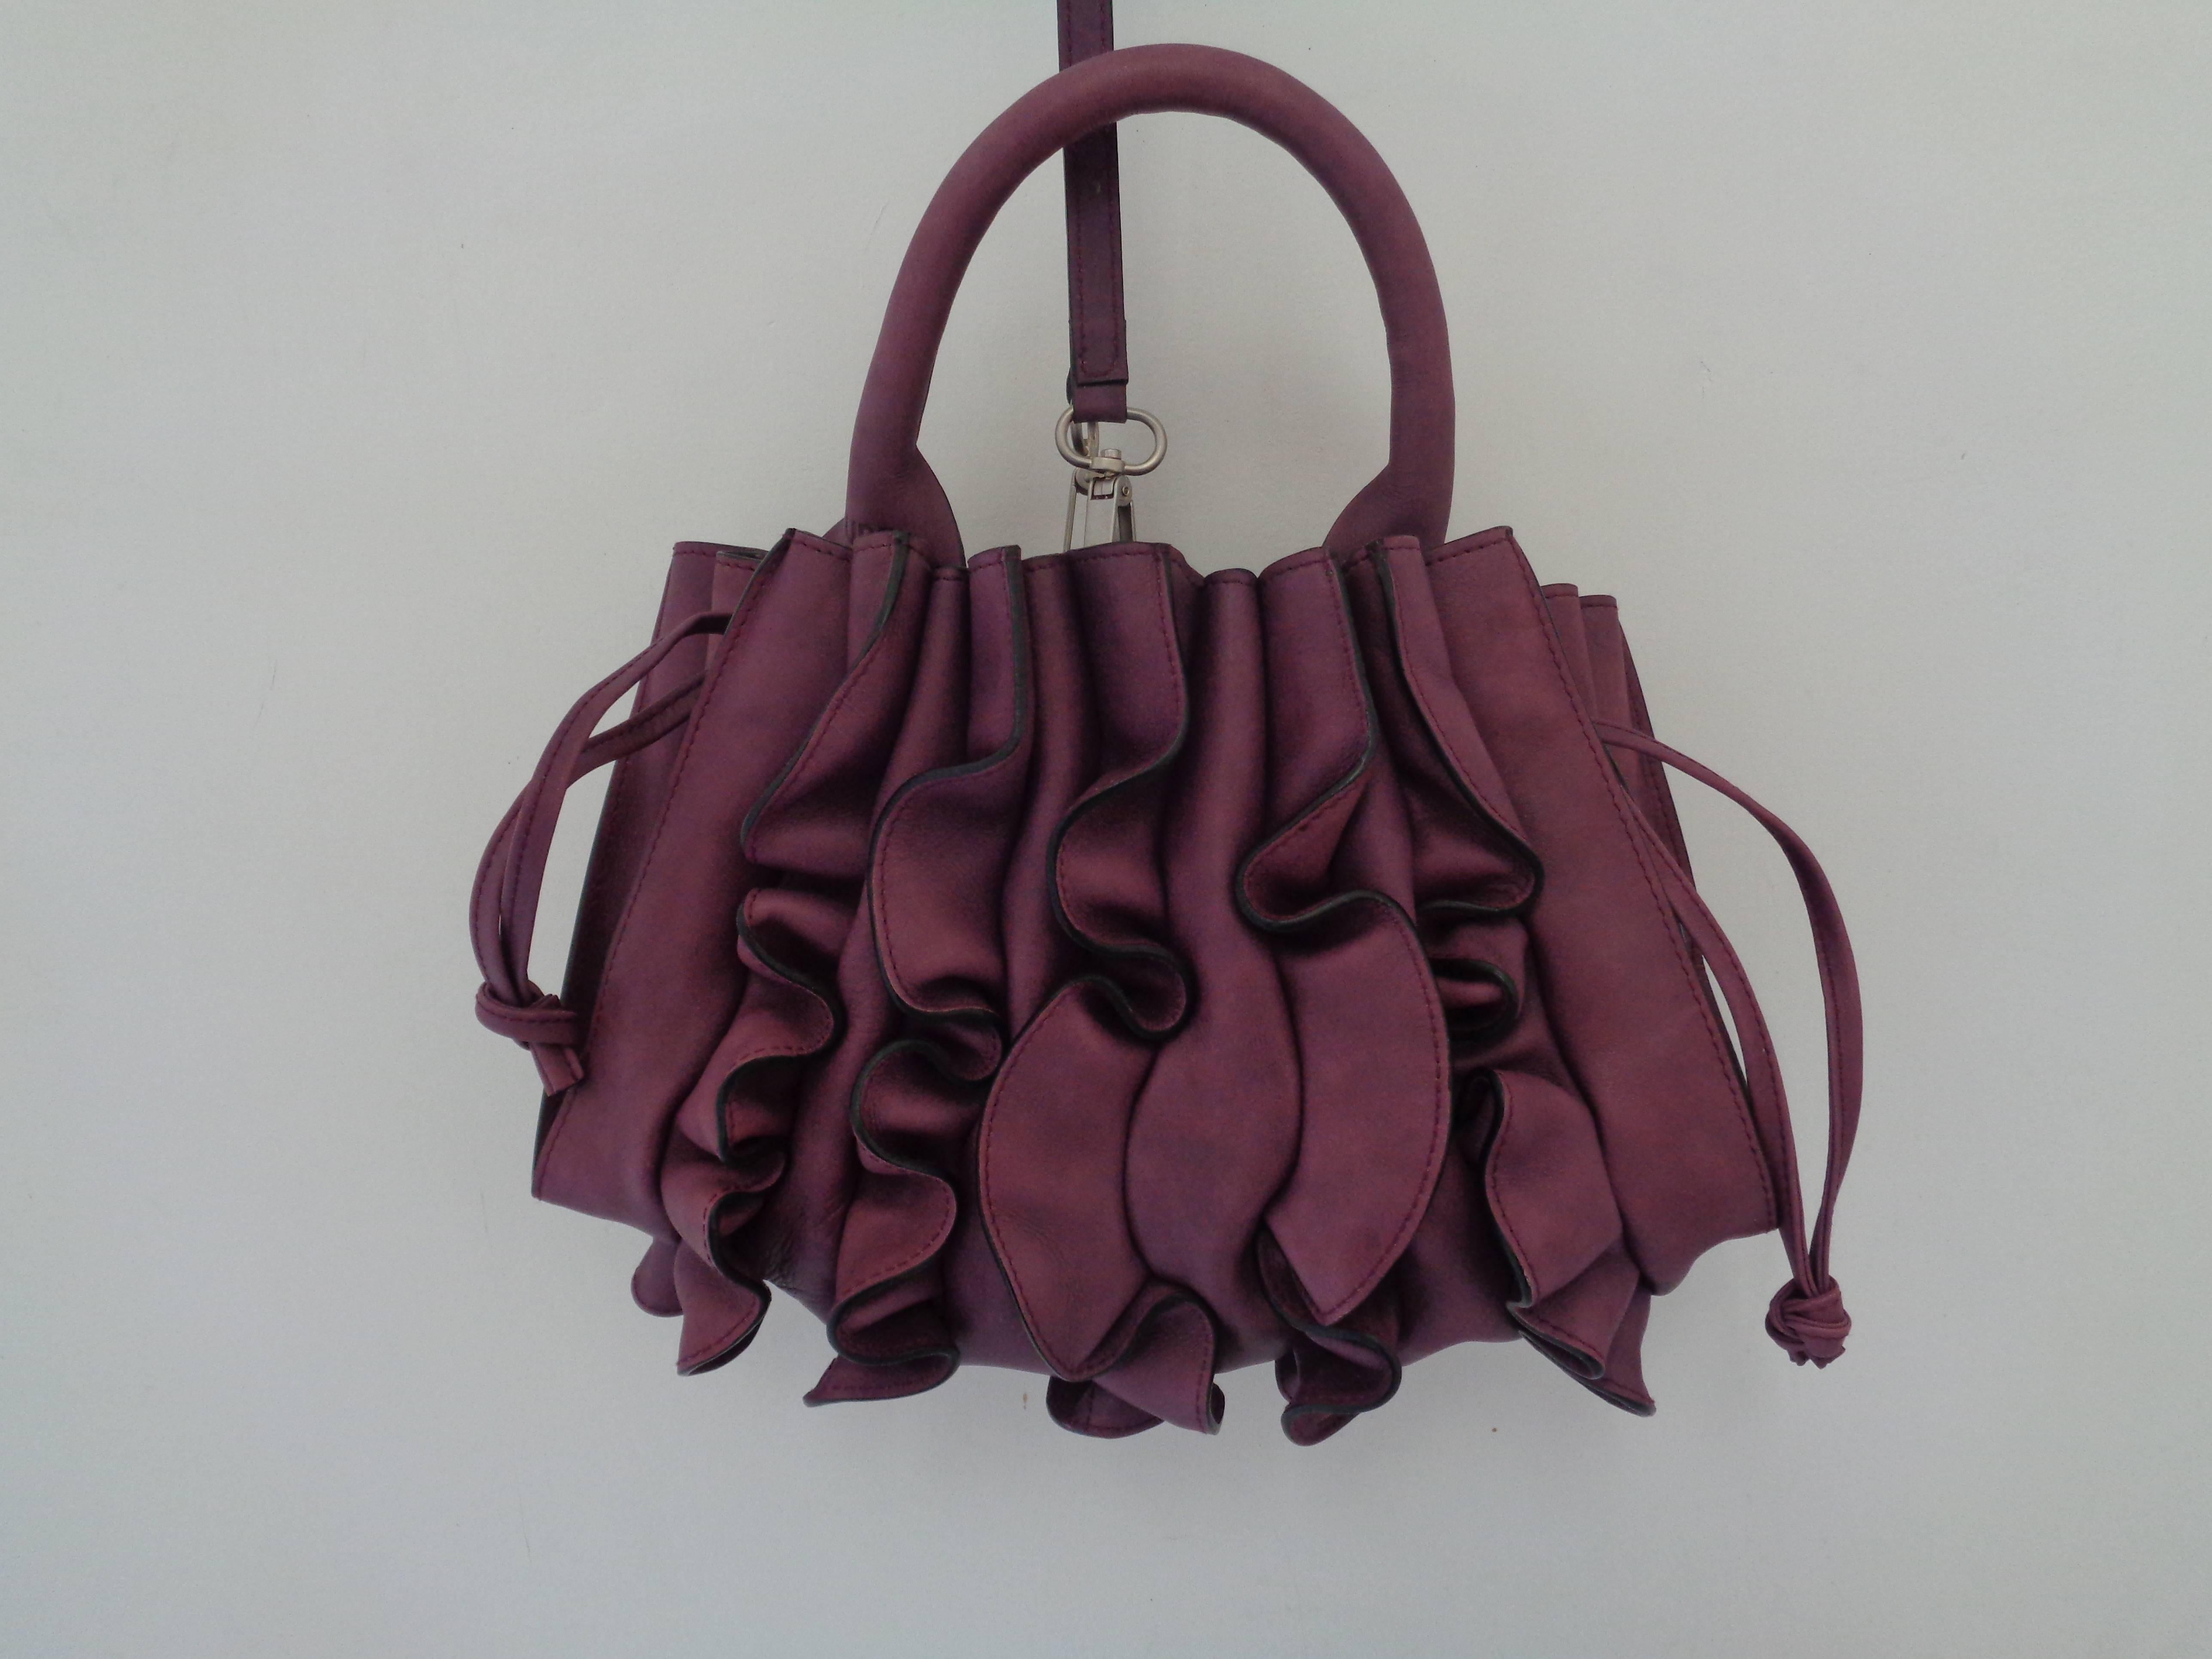 2013/2014 Fall-Winter Lupo Barcelona Purple Leather Bag

totally made in spain in 100% Calf leather

Unworn still with dustbag

San be worn as satchel, shoulder bag handle bag